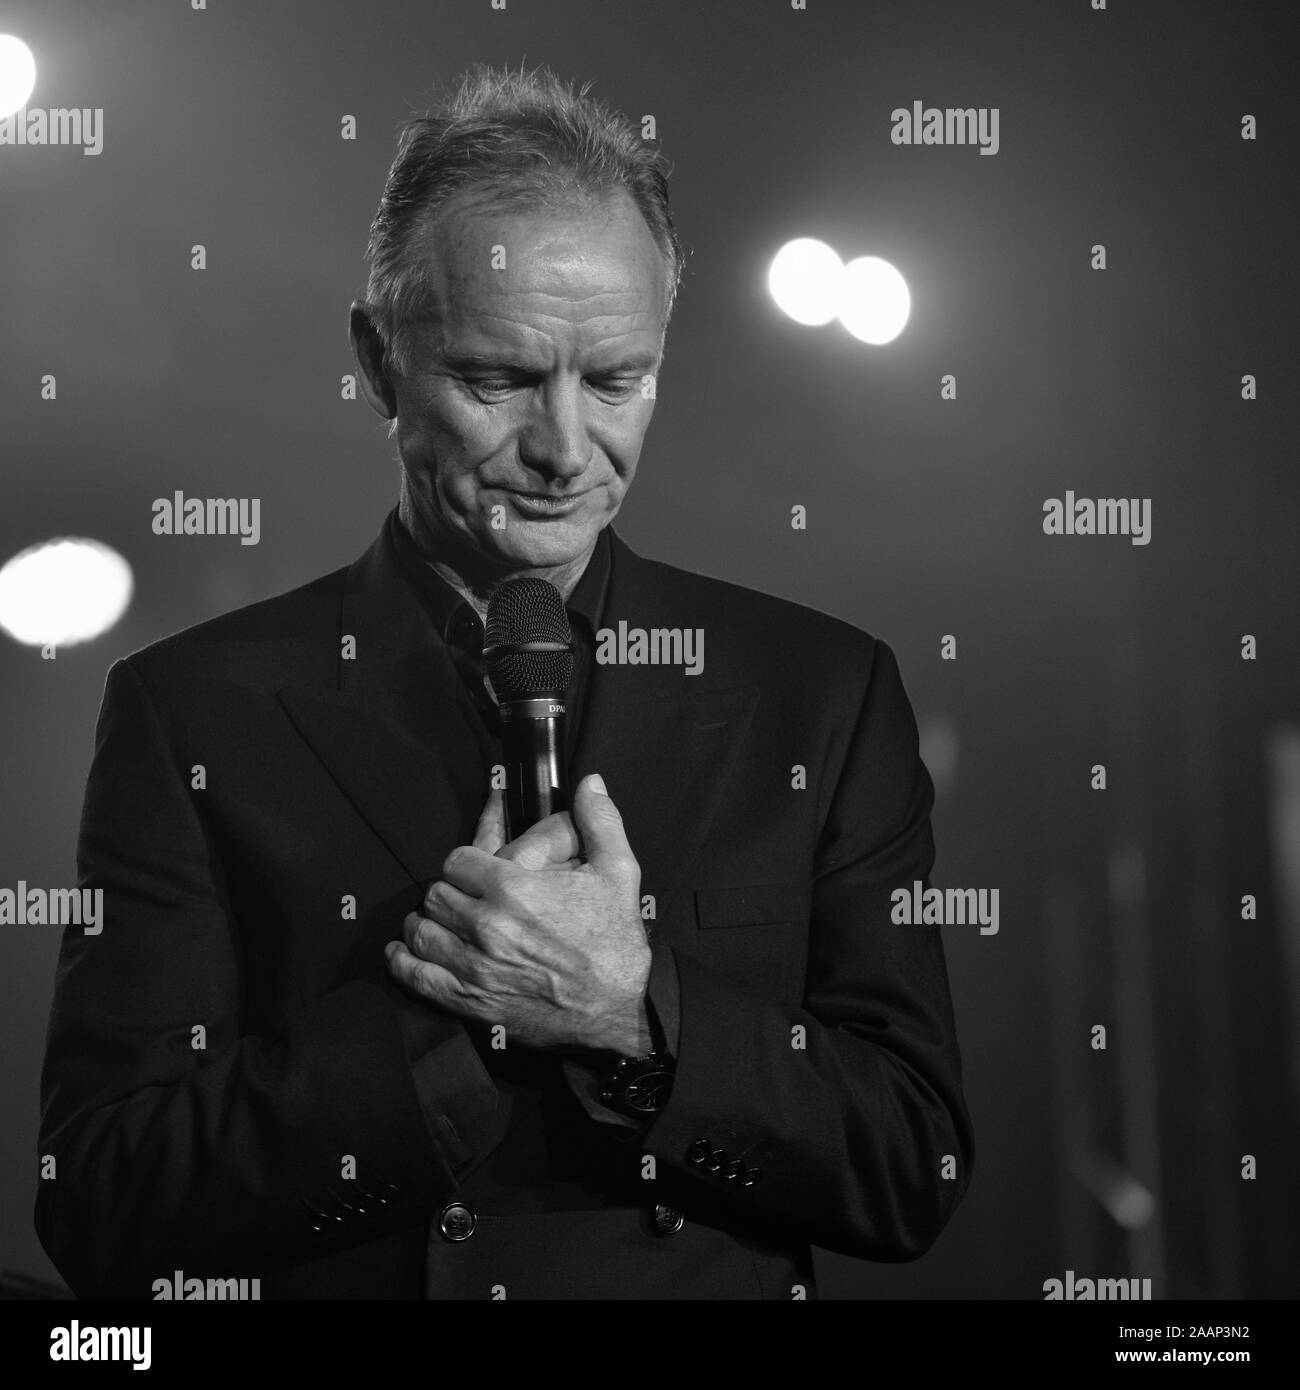 The singer Sting at the Griminelli & Friends concert Stock Photo